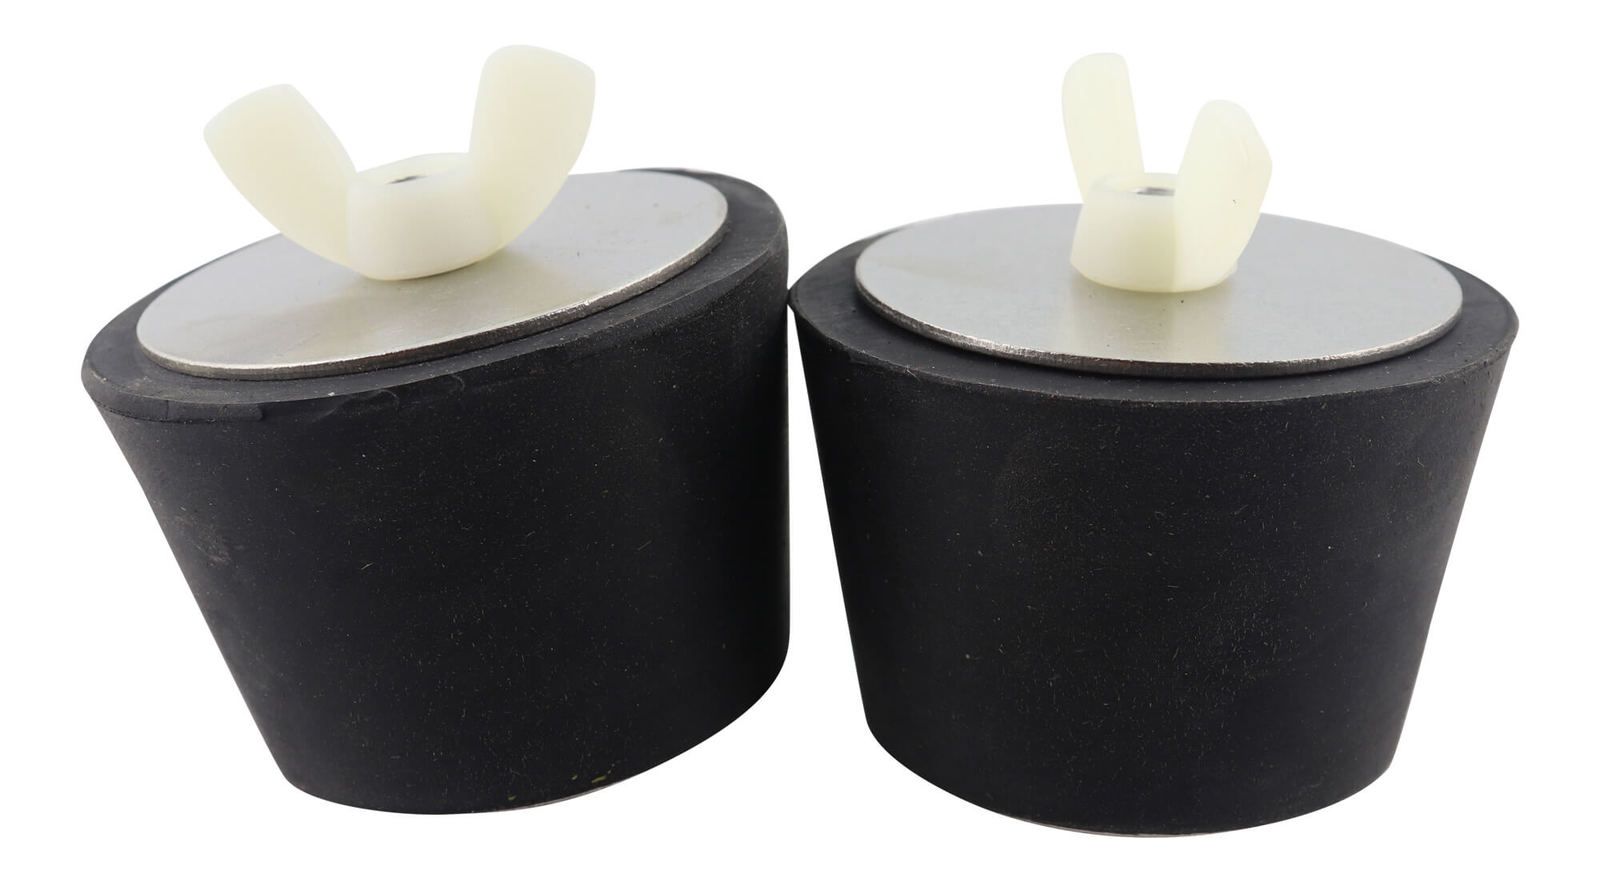 Twin Expansion Plug Rubber Tapered 50 mm Plug For Swimming Pool Pipework 50mm x2